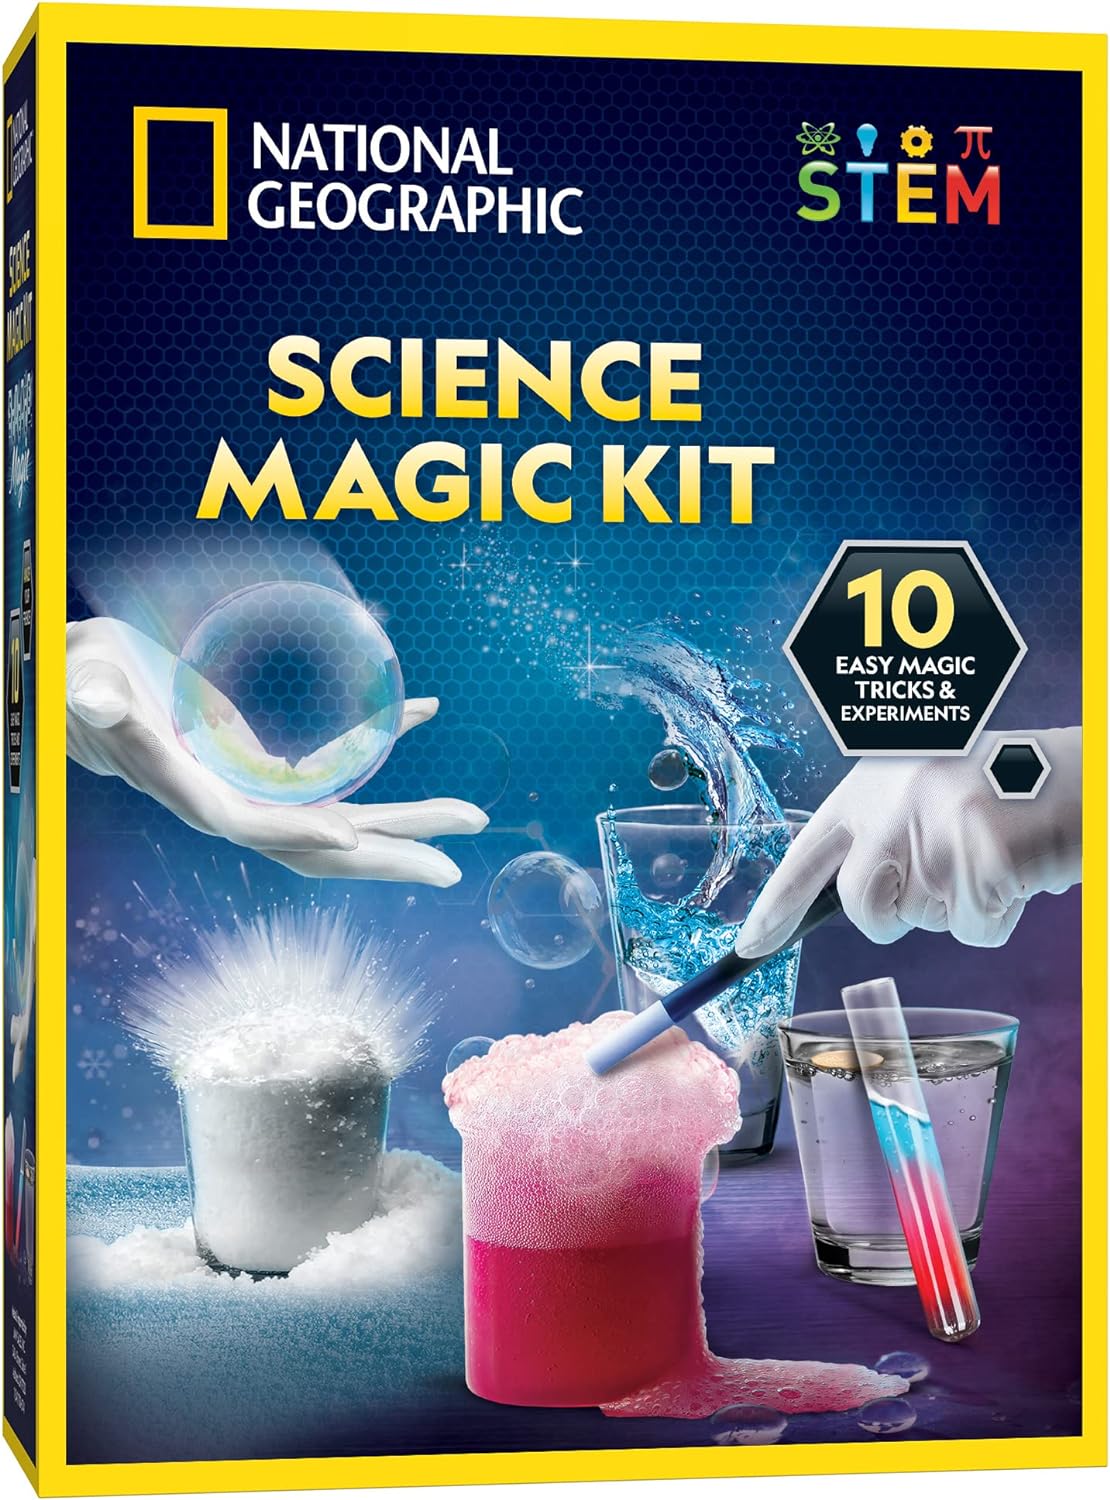 NATIONAL GEOGRAPHIC Magic Chemistry Set – Science Kit for Kids with 10 Amazing Magic Tricks, STEM Projects and Science Experiments, Science Toys, Great Gift for Boys and Girls 8-12 (Amazon Exclusive)